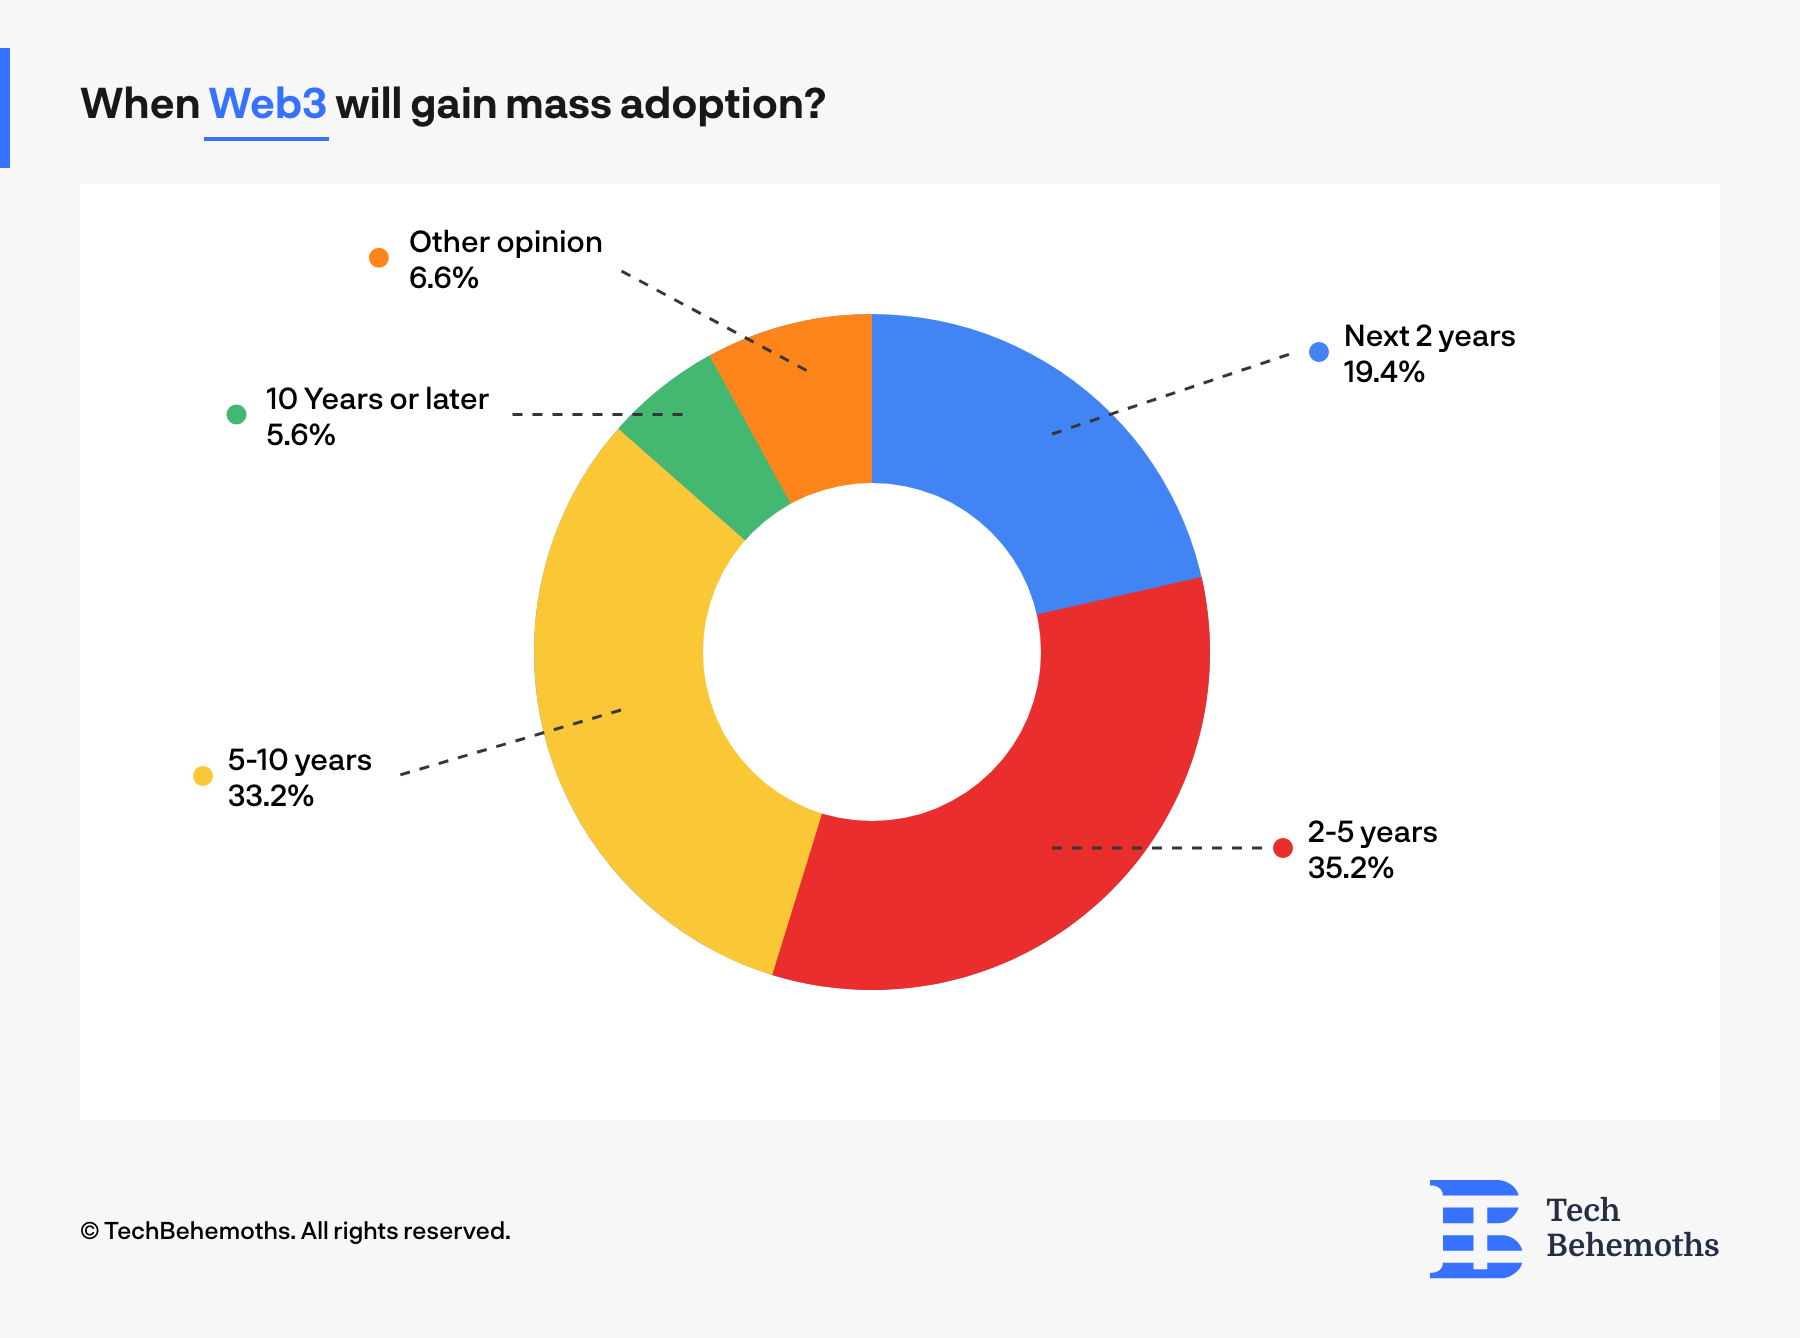 Web3 will gain mass adoption in the next 5 years, majority of IT companies say